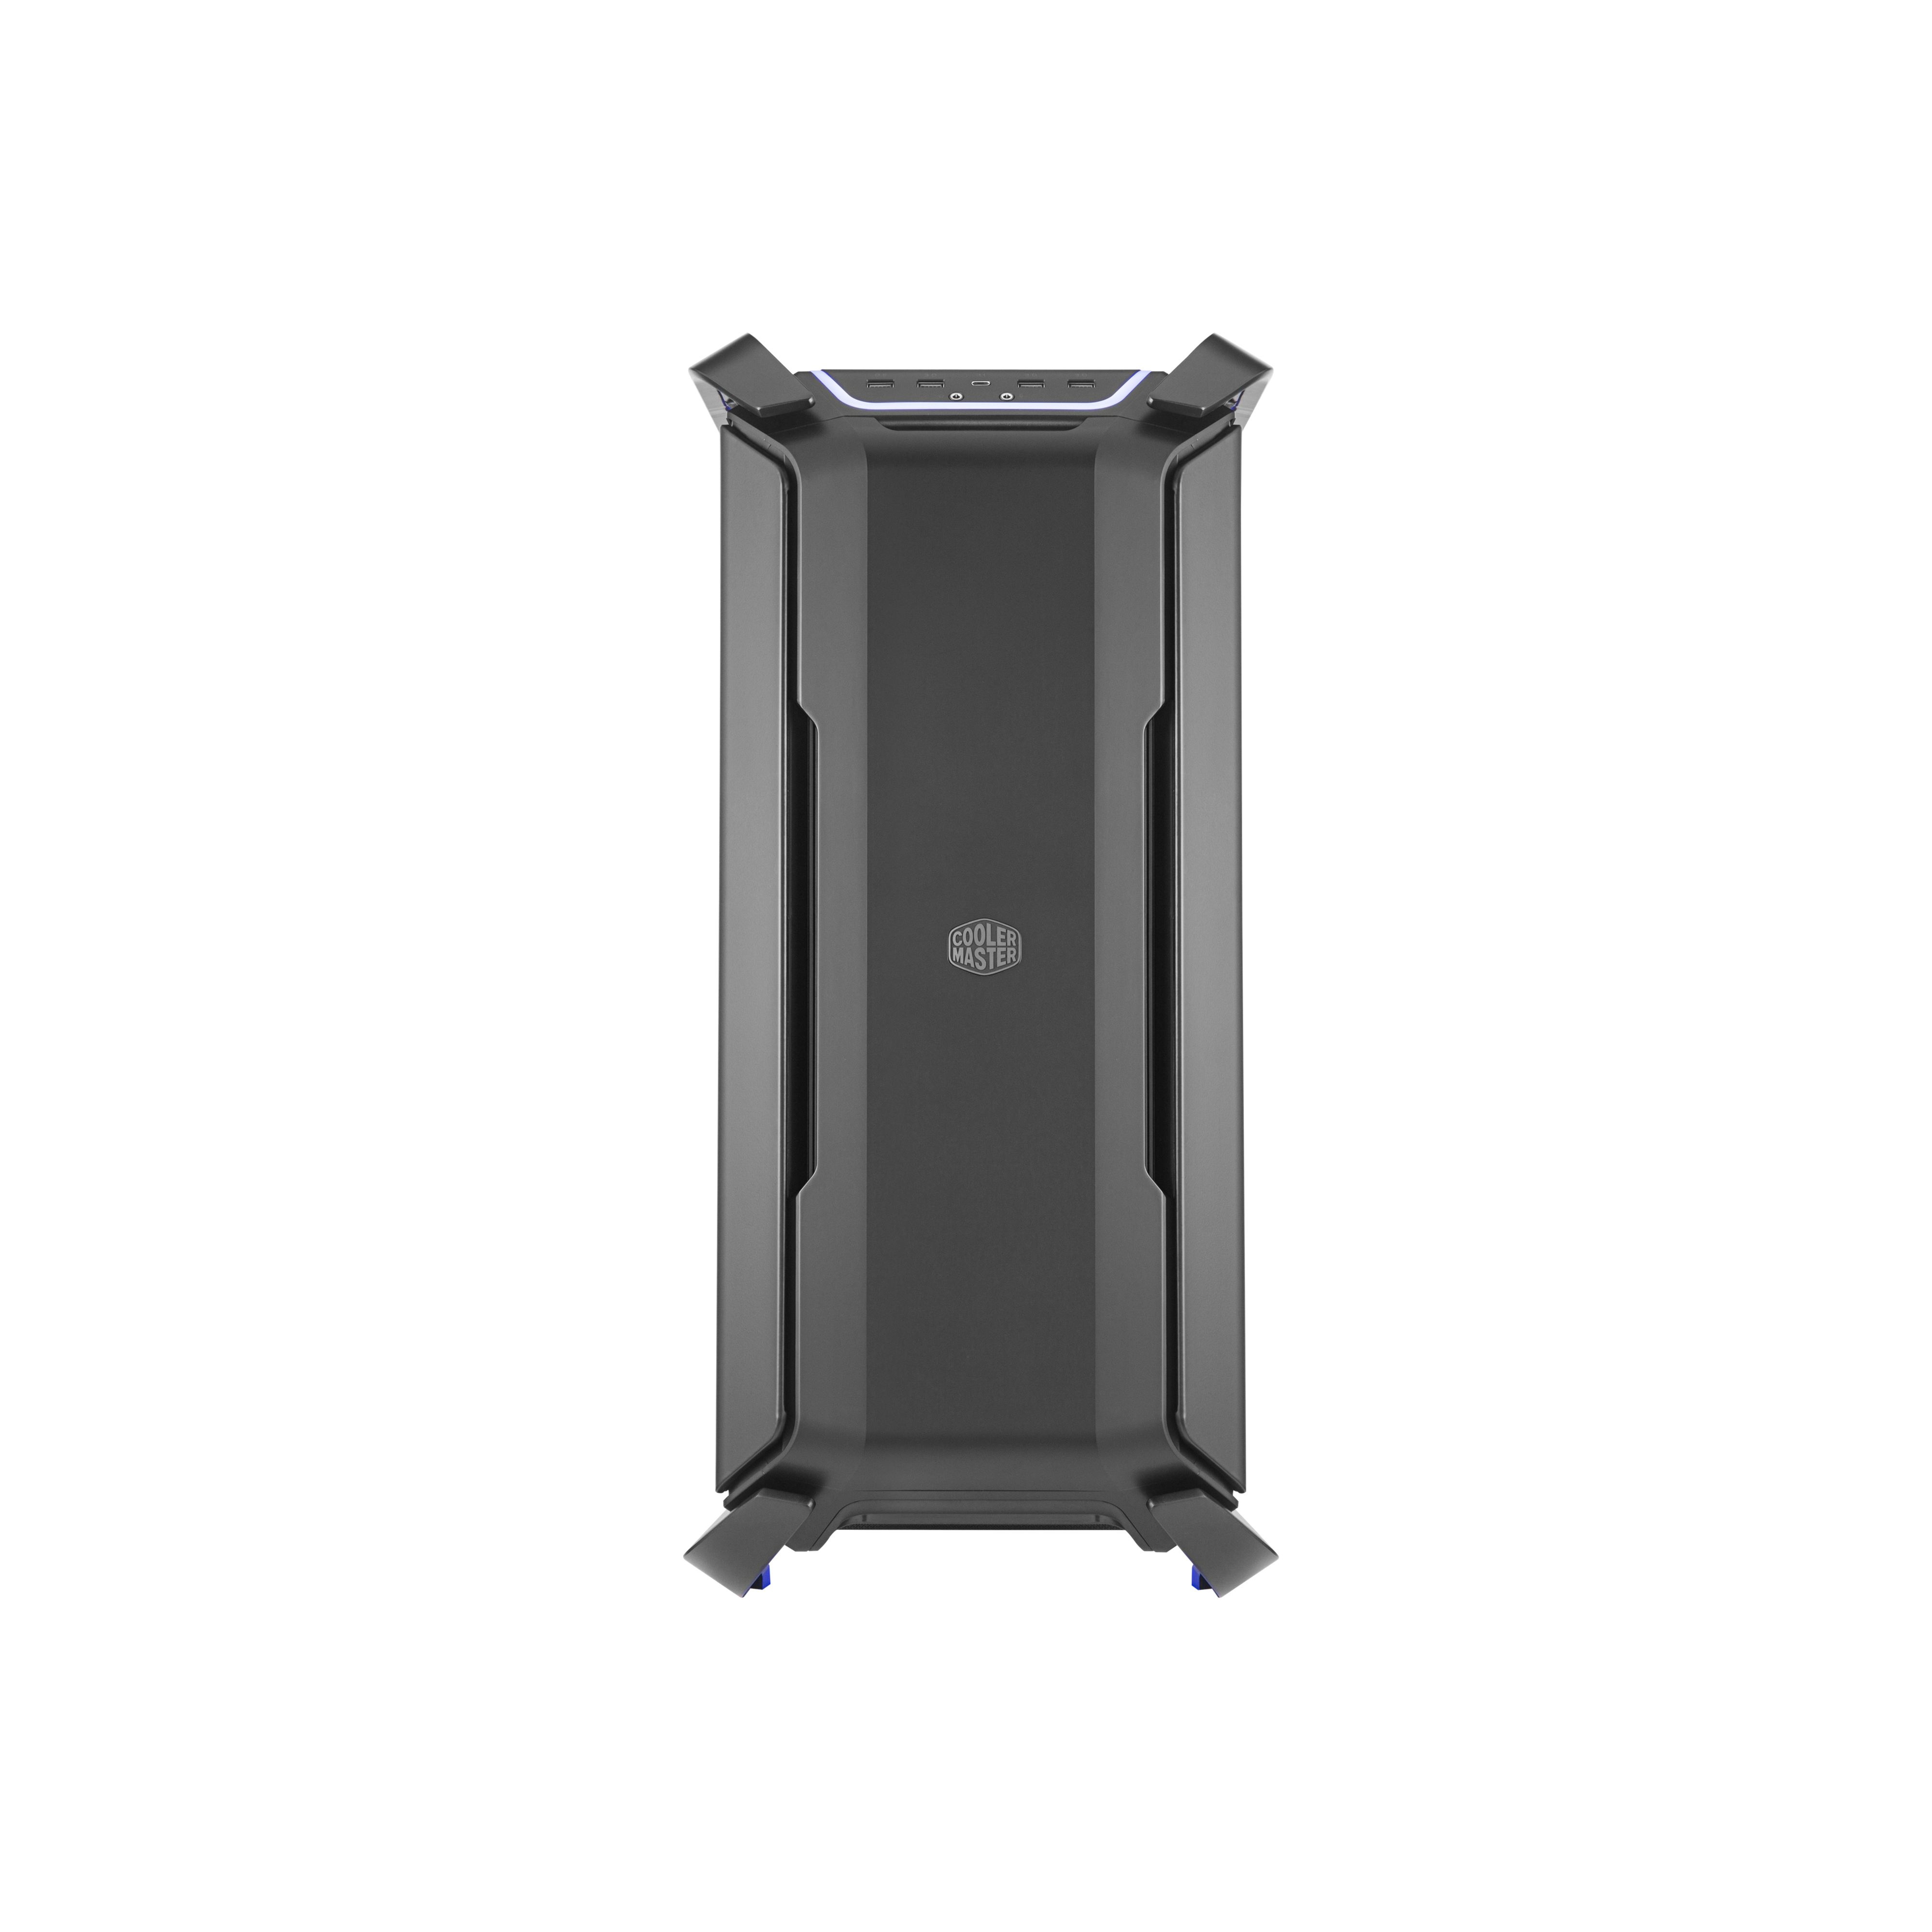 RGB Matte Steel Case with Dual Curved Glass Door Cooler Master COSMOS C700P Black Edition 2.0 Modular Frame and Enhanced Hardware Capacity Full Tower